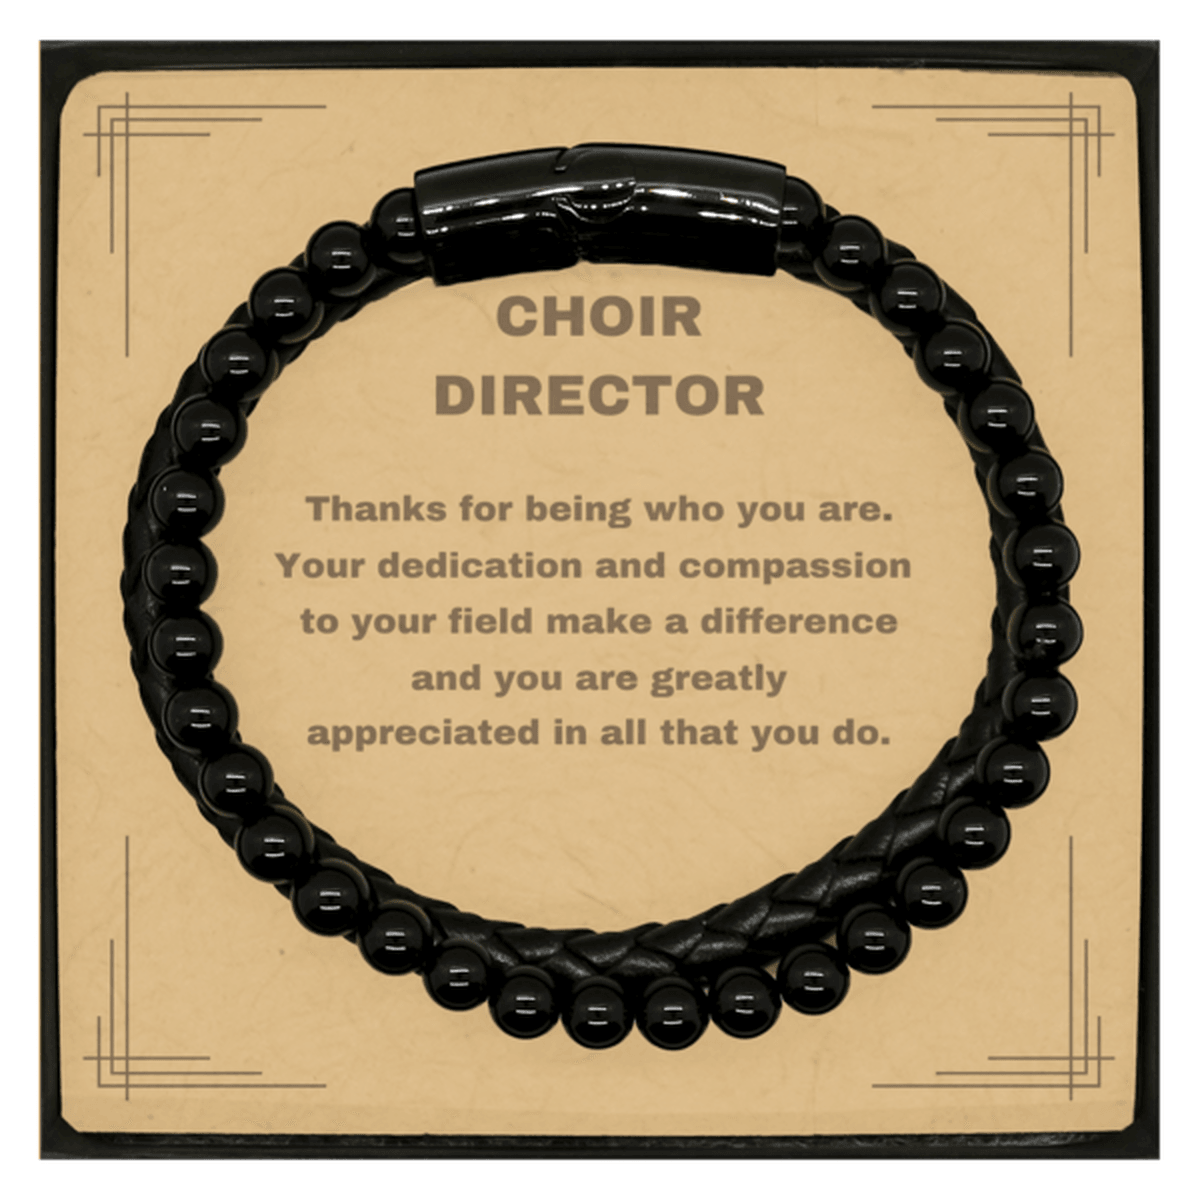 Choir Director Black Braided Leather Stone Bracelet - Thanks for being who you are - Birthday Christmas Jewelry Gifts Coworkers Colleague Boss - Mallard Moon Gift Shop